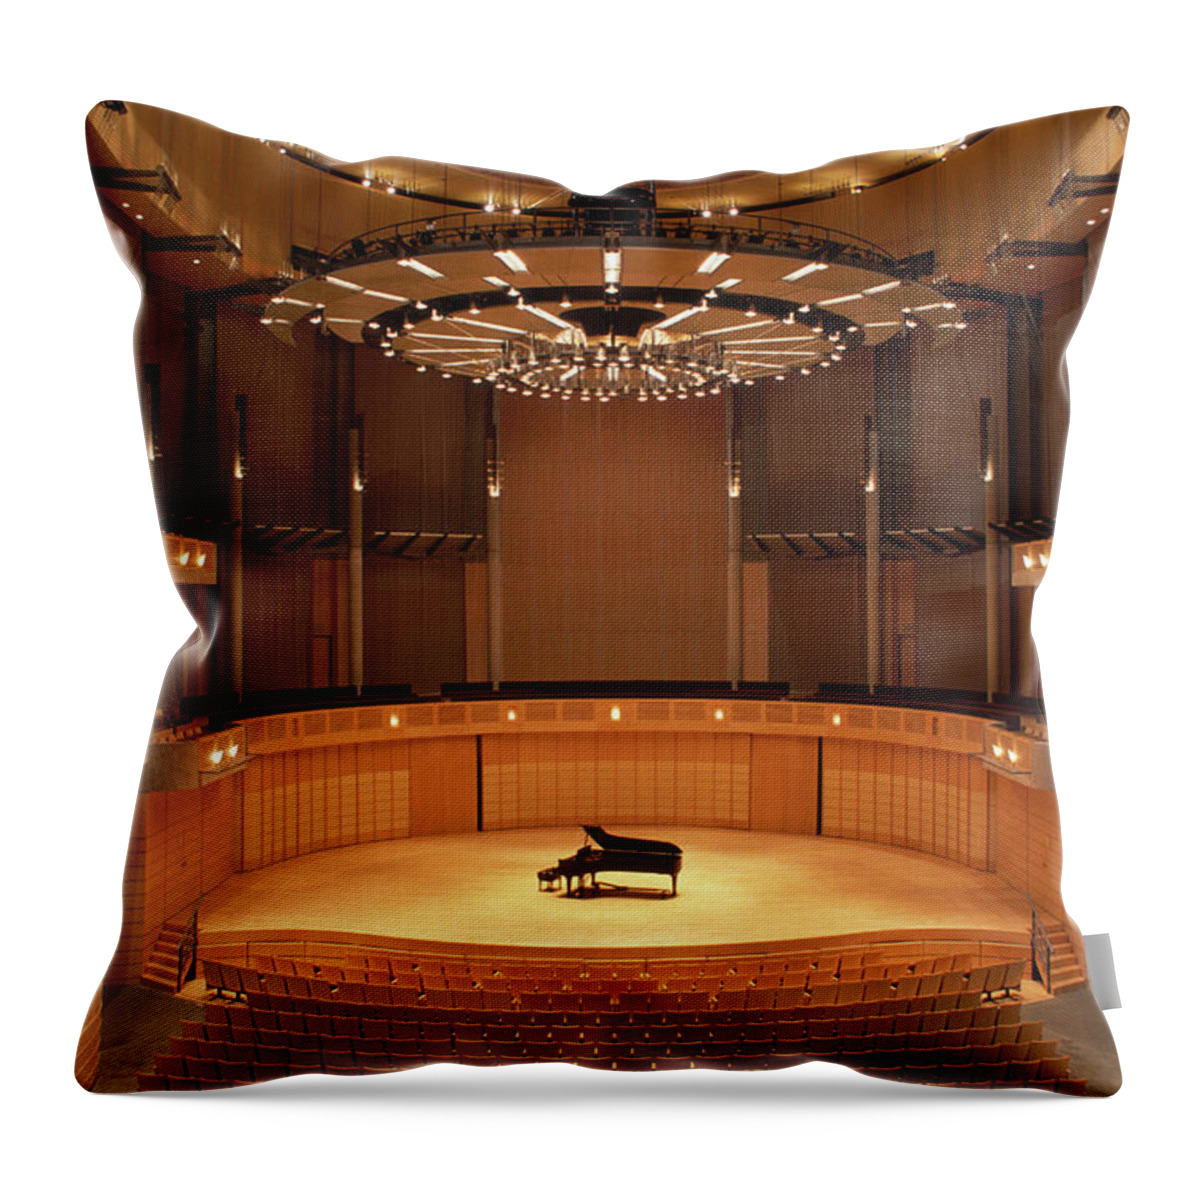 Empty Throw Pillow featuring the photograph Interior Of Empty Theater, Piano At by Ivan Hunter